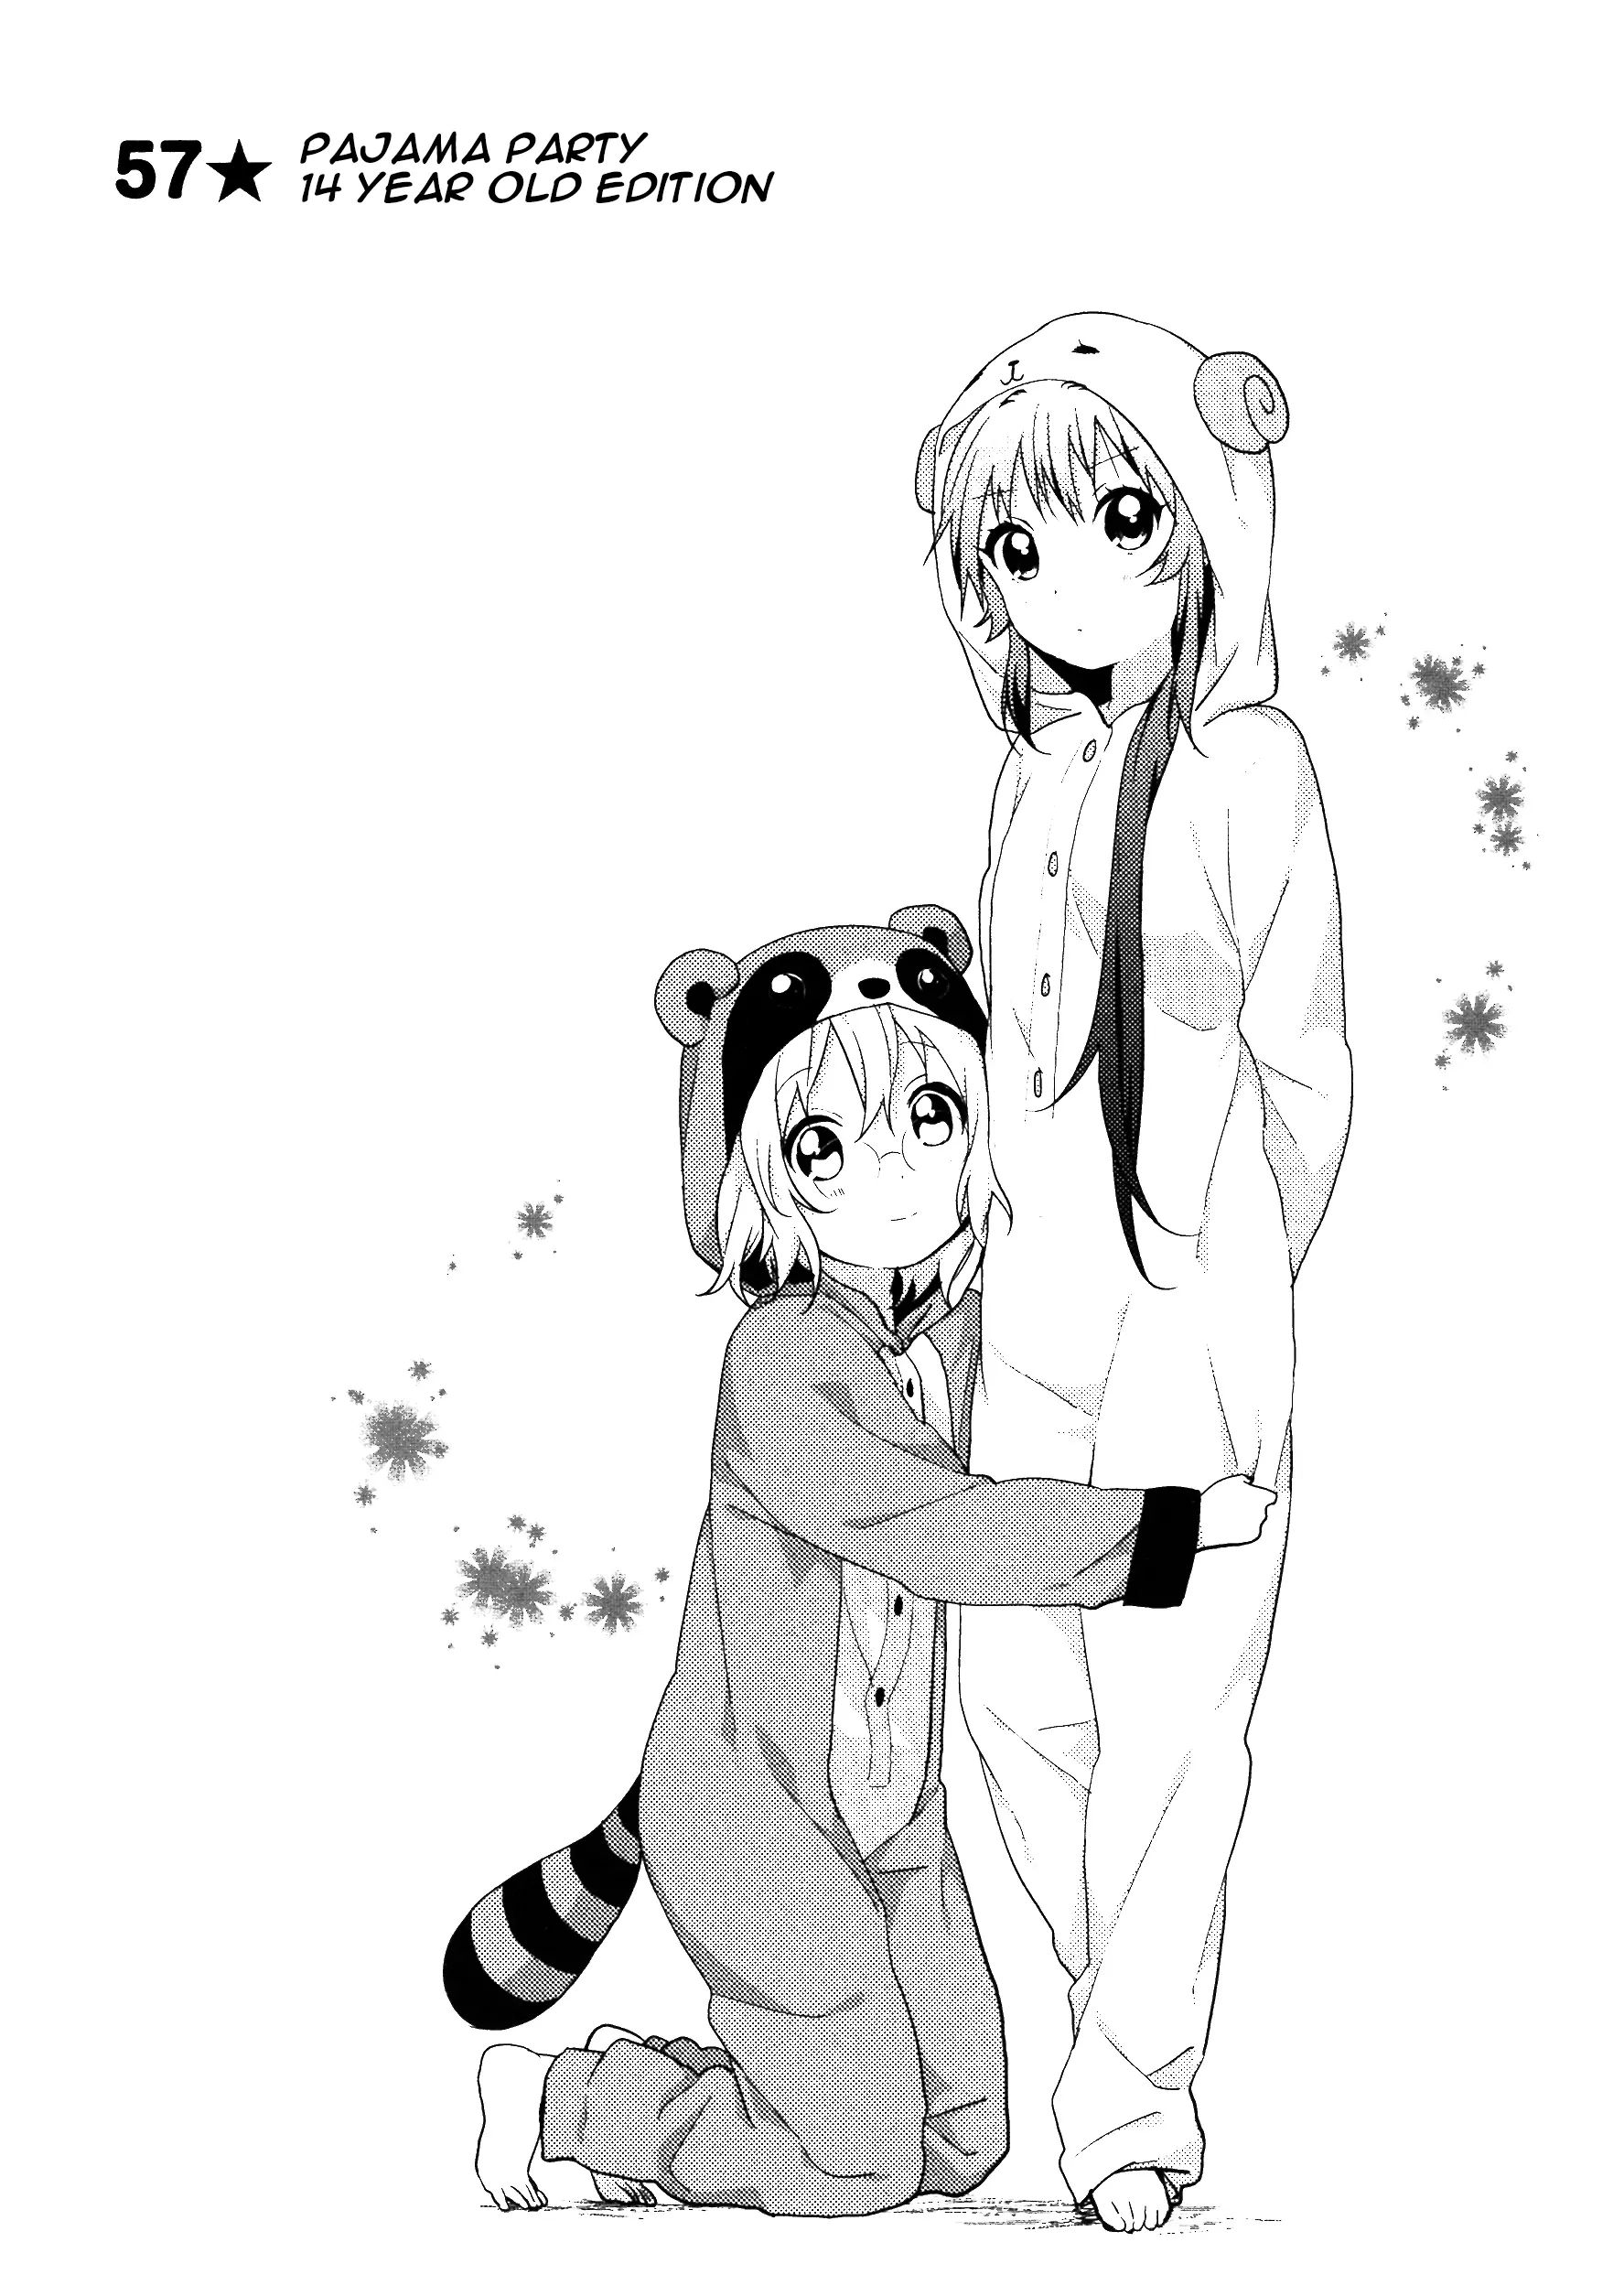 Yuru Yuri Vol.8 Chapter 57: Pajama Party 14 Year Old Edition - Picture 1